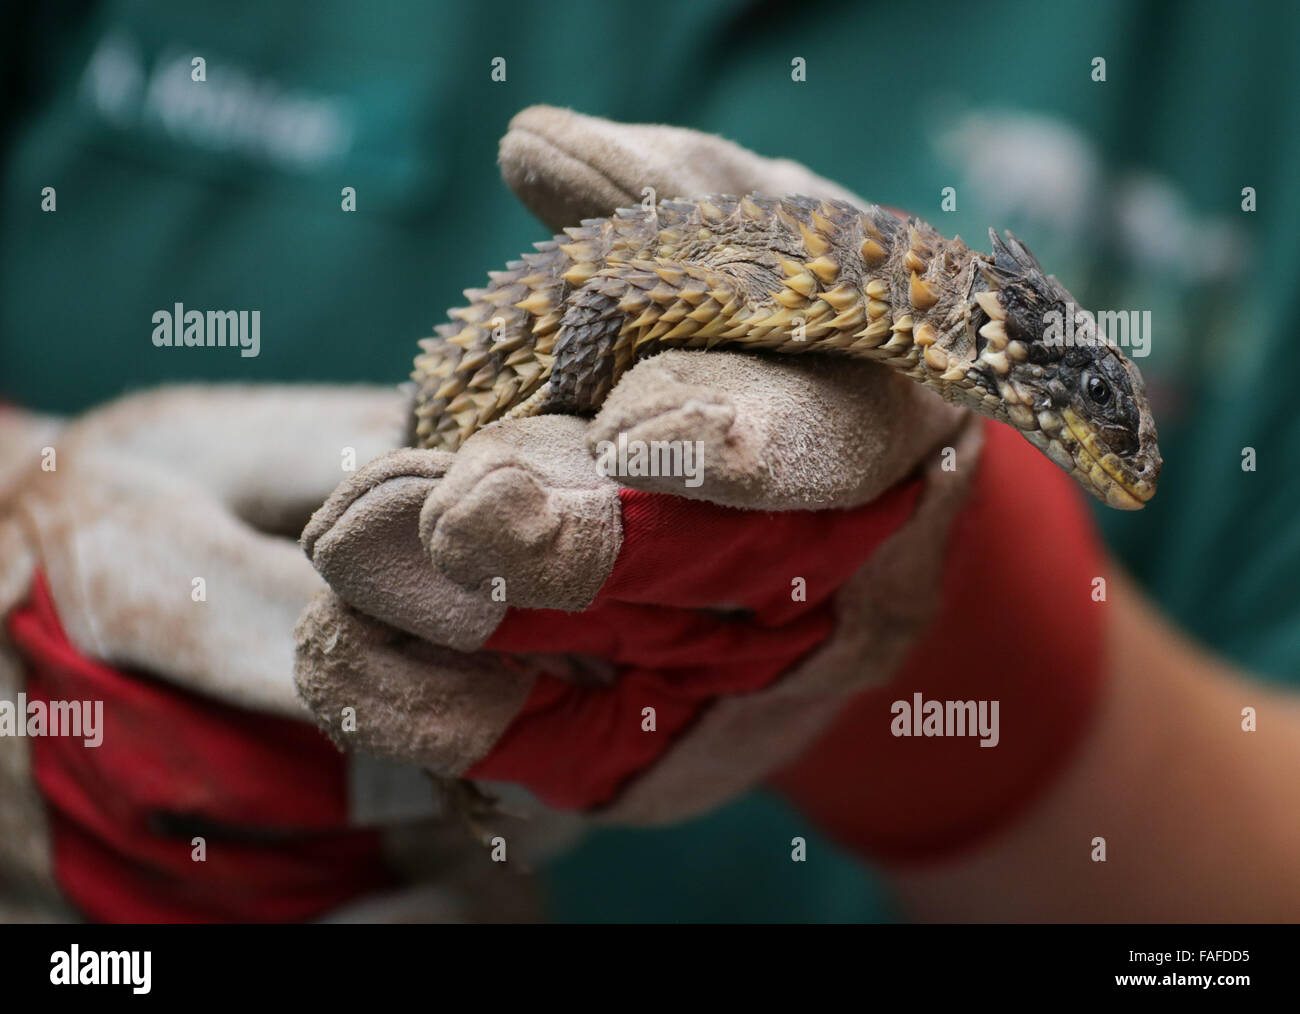 Hamburg, Germany. 29th Dec, 2015. A zoo keeper holds a giant girdled lizard (Cordylus giganteus) at Tierpark Hagenbeck zoo in Hamburg, Germany, 29 December 2015. Once a year, an inventory and health checks are conducted for the inhabitants of the tropical aquarium. PHOTO: AXEL HEIMKEN/DPA/Alamy Live News Stock Photo